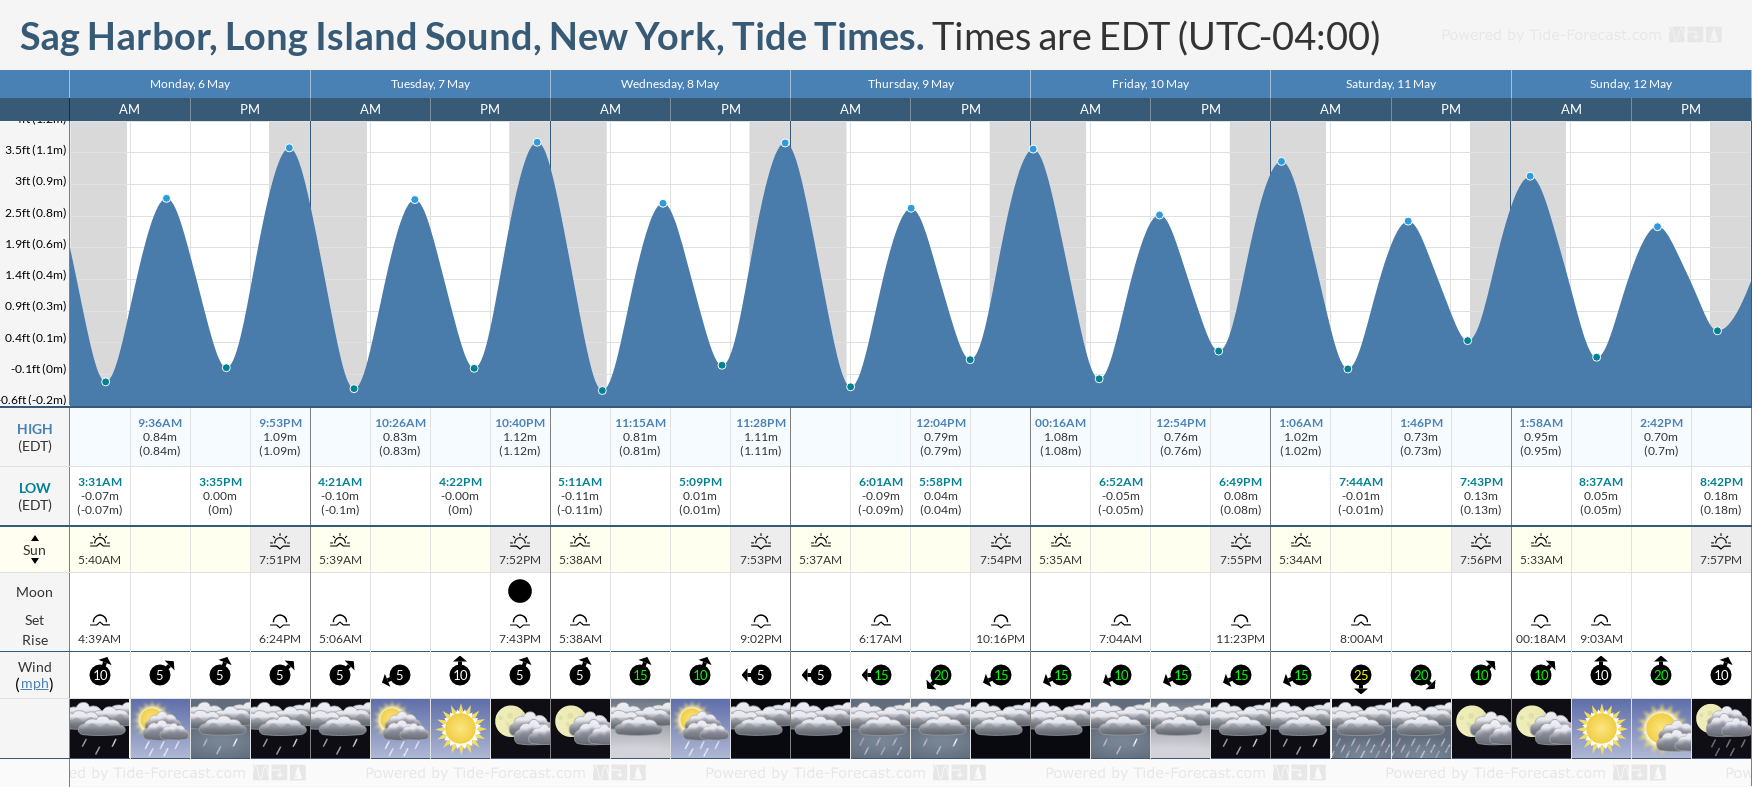 Sag Harbor, Long Island Sound, New York Tide Chart including high and low tide times for the next 7 days